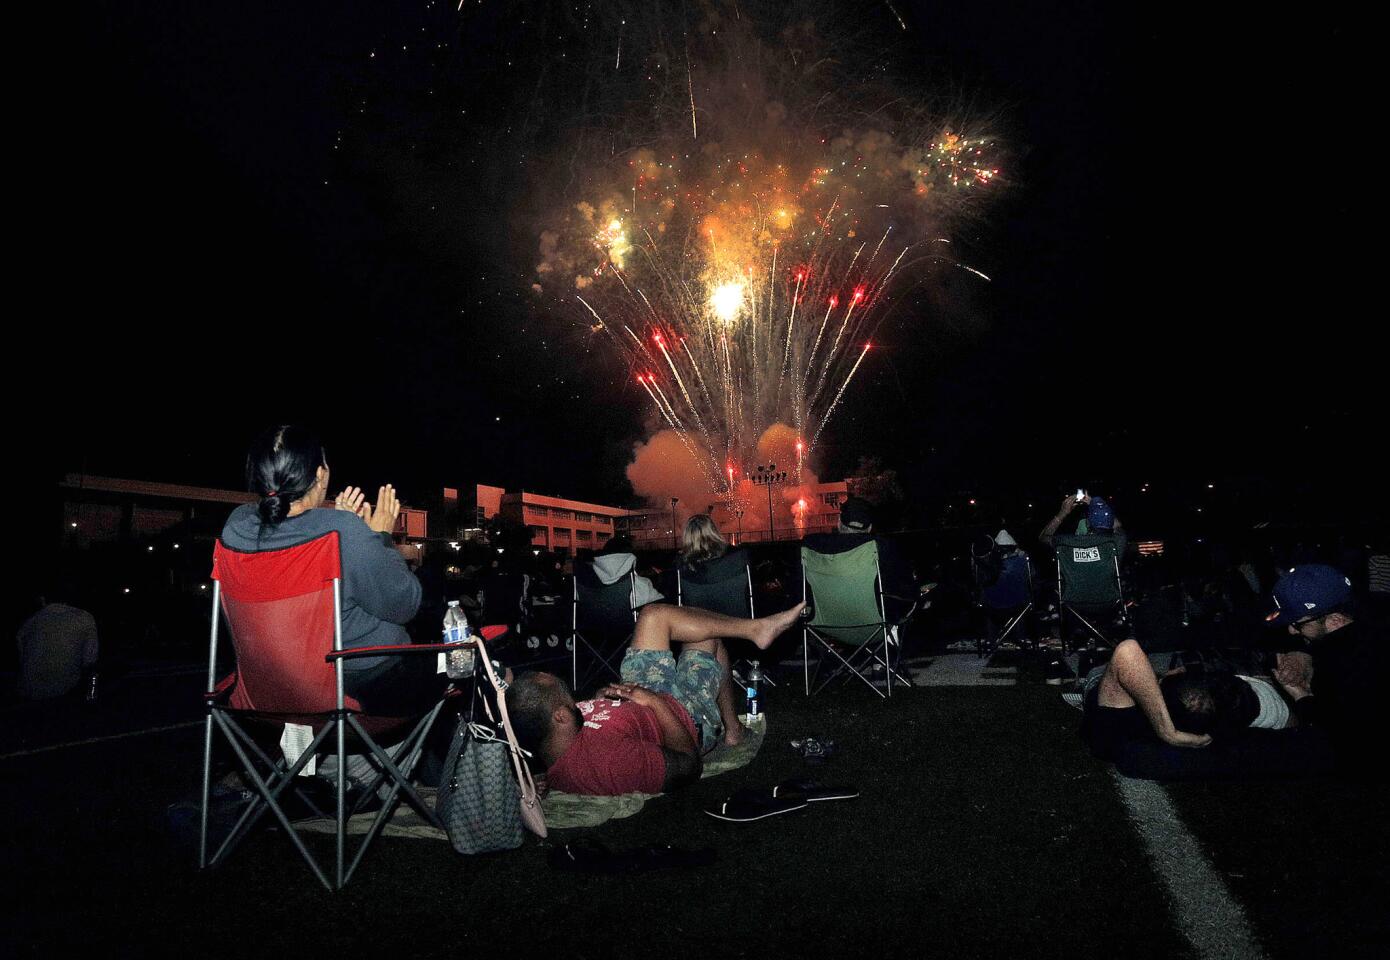 A small portion of the large crowd on the football field watching fireworks at the 14th annual Crescenta Valley Fireworks Association Fireworks Extravaganza at Crescenta Valley High School on Thursday, July 4, 2019. Food trucks, bouncy slides, games, live music, all followed by fireworks were there for the ears and the eyes.